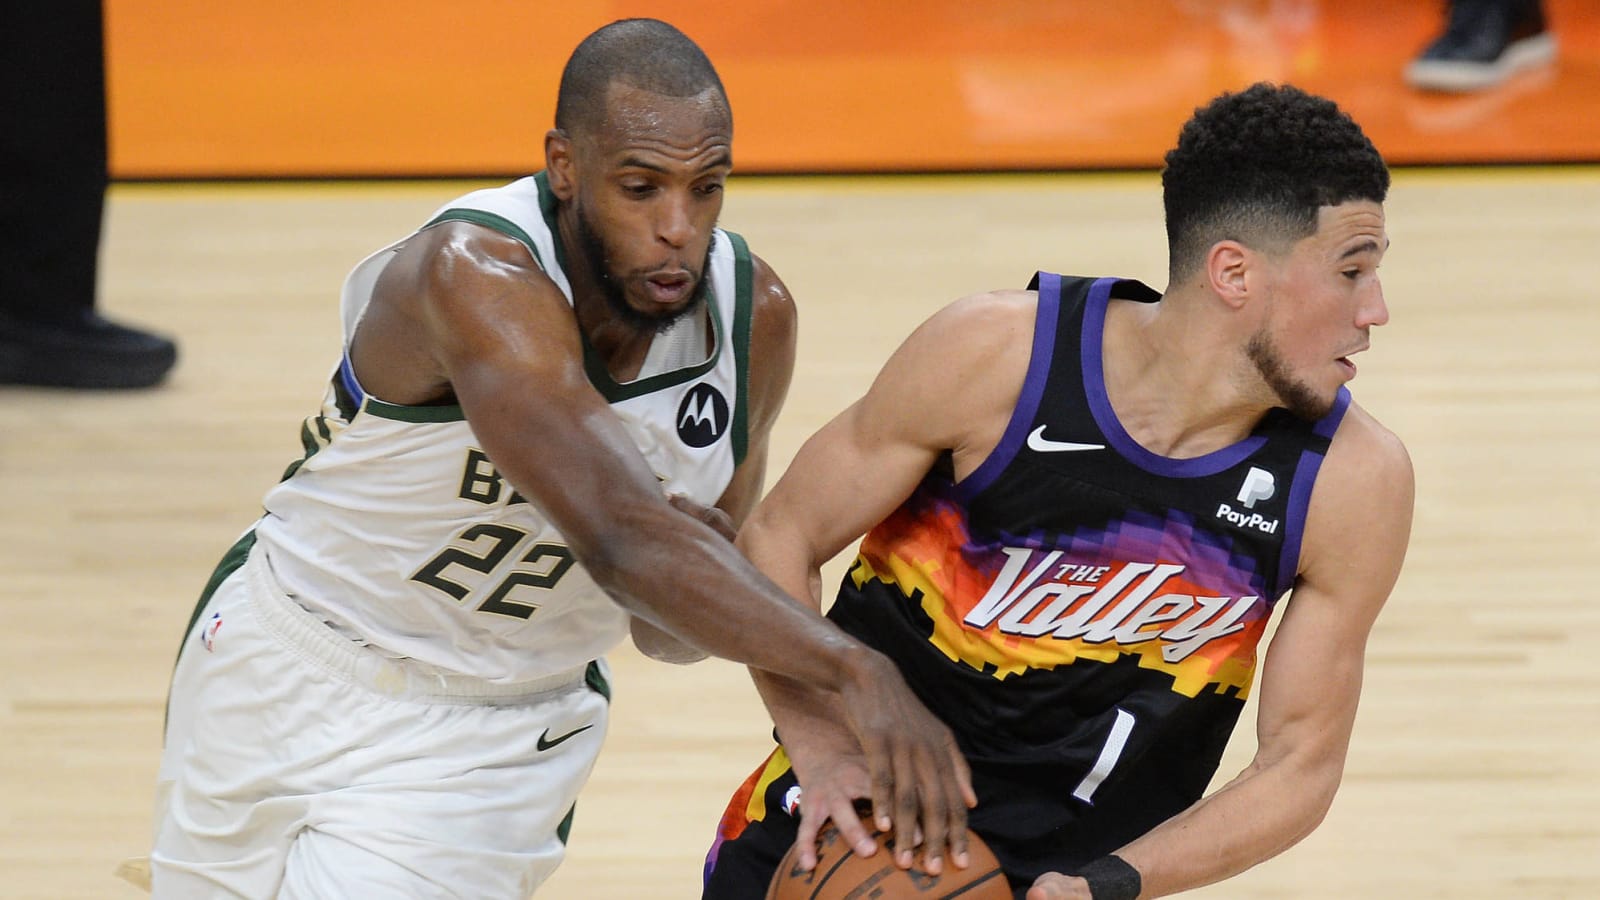 NBA Finals foes Khris Middleton, Devin Booker now Olympic teammates